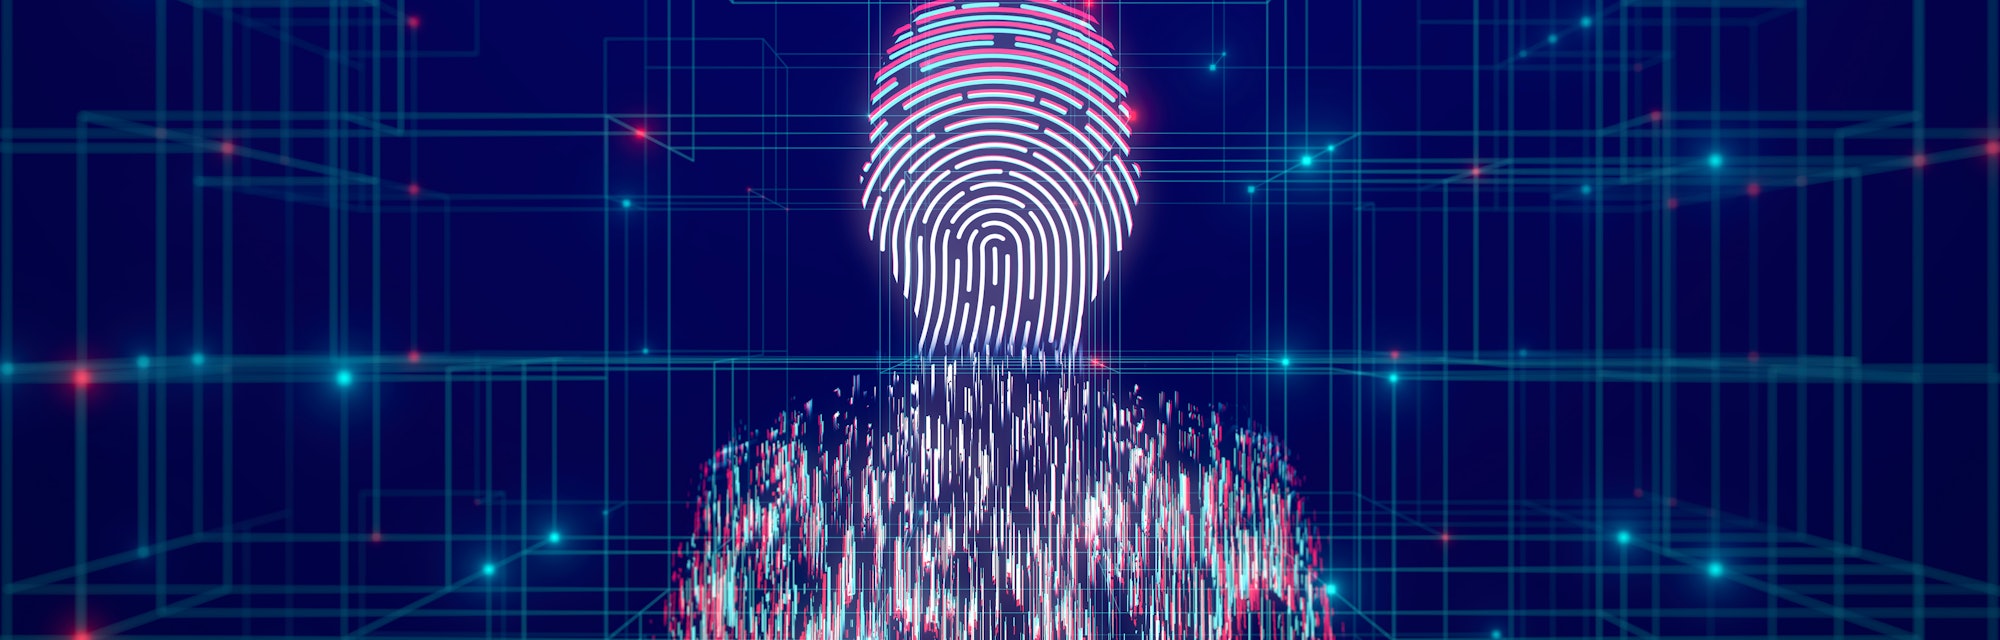 illustration of Digital identity and privacy